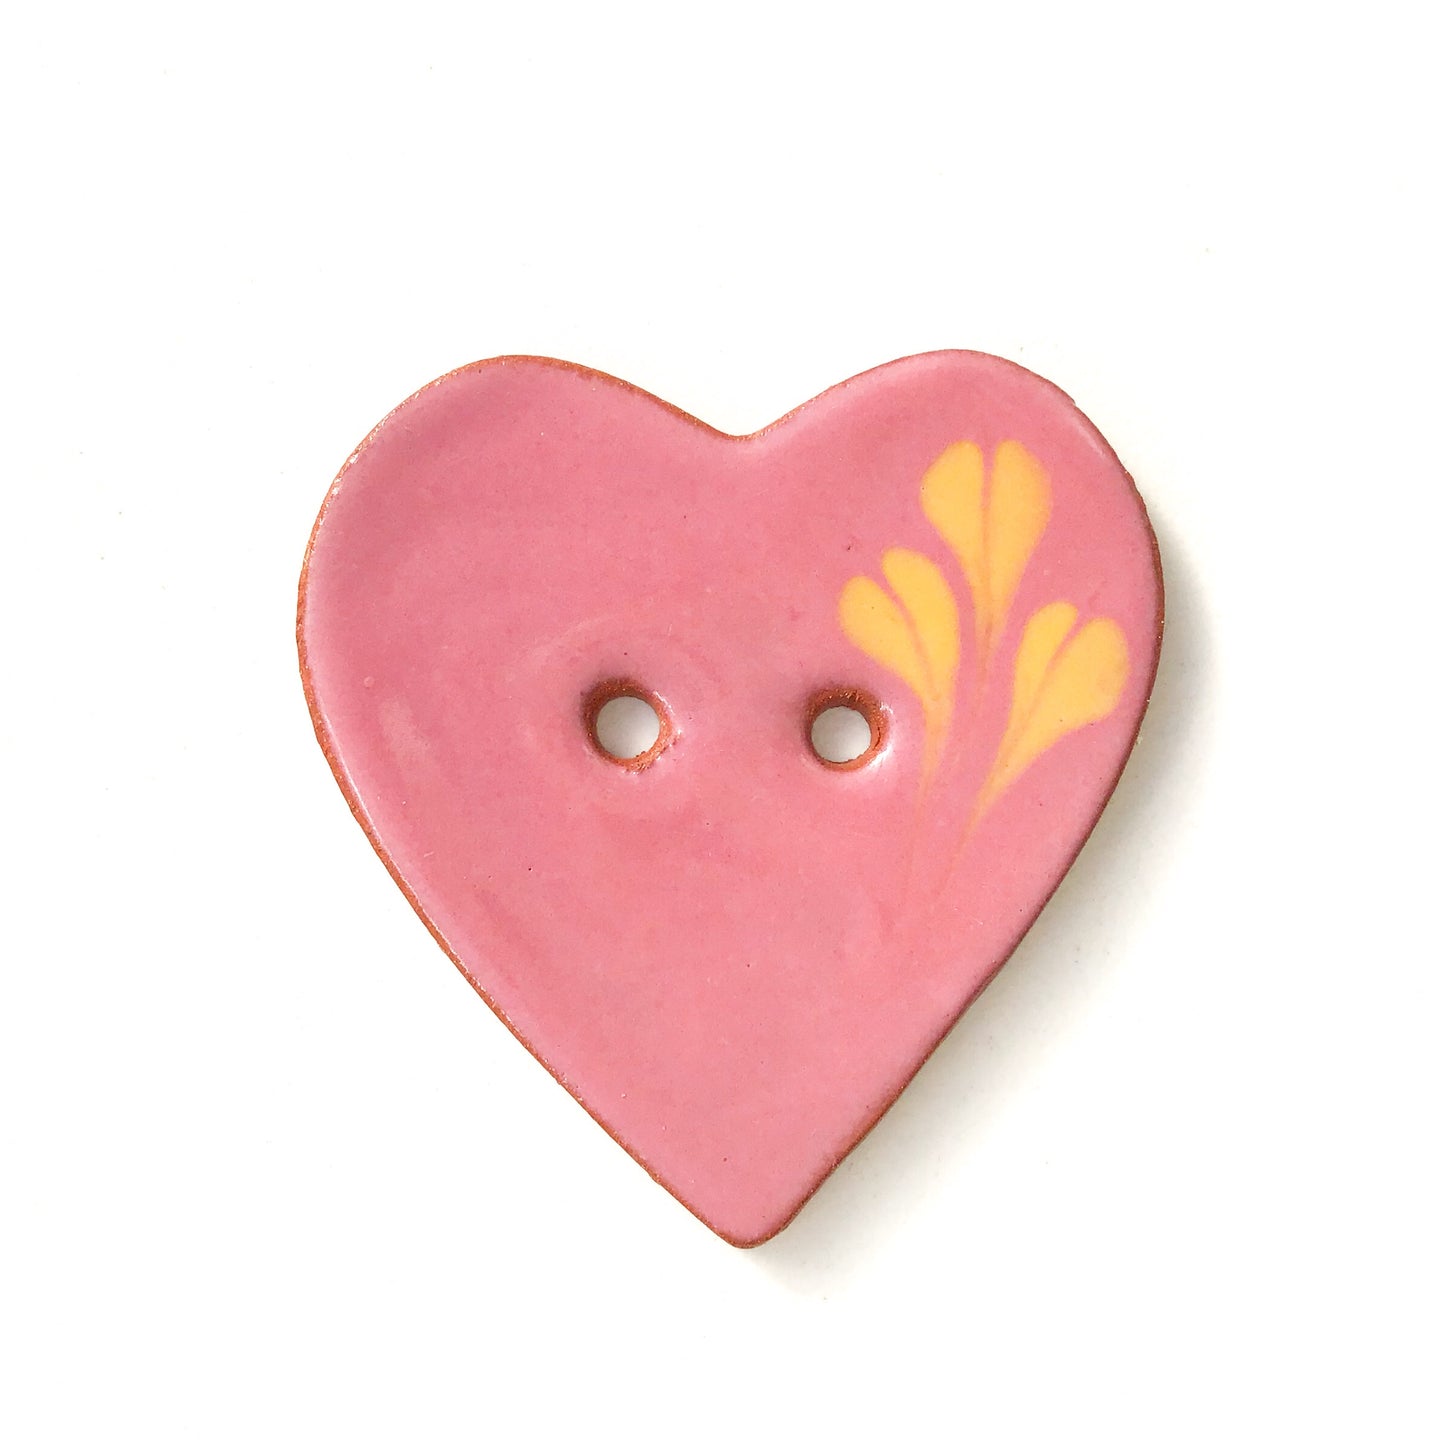 Decorative Heart Buttons - Earthy Pink Ceramic Heart Button - 1 3/8"